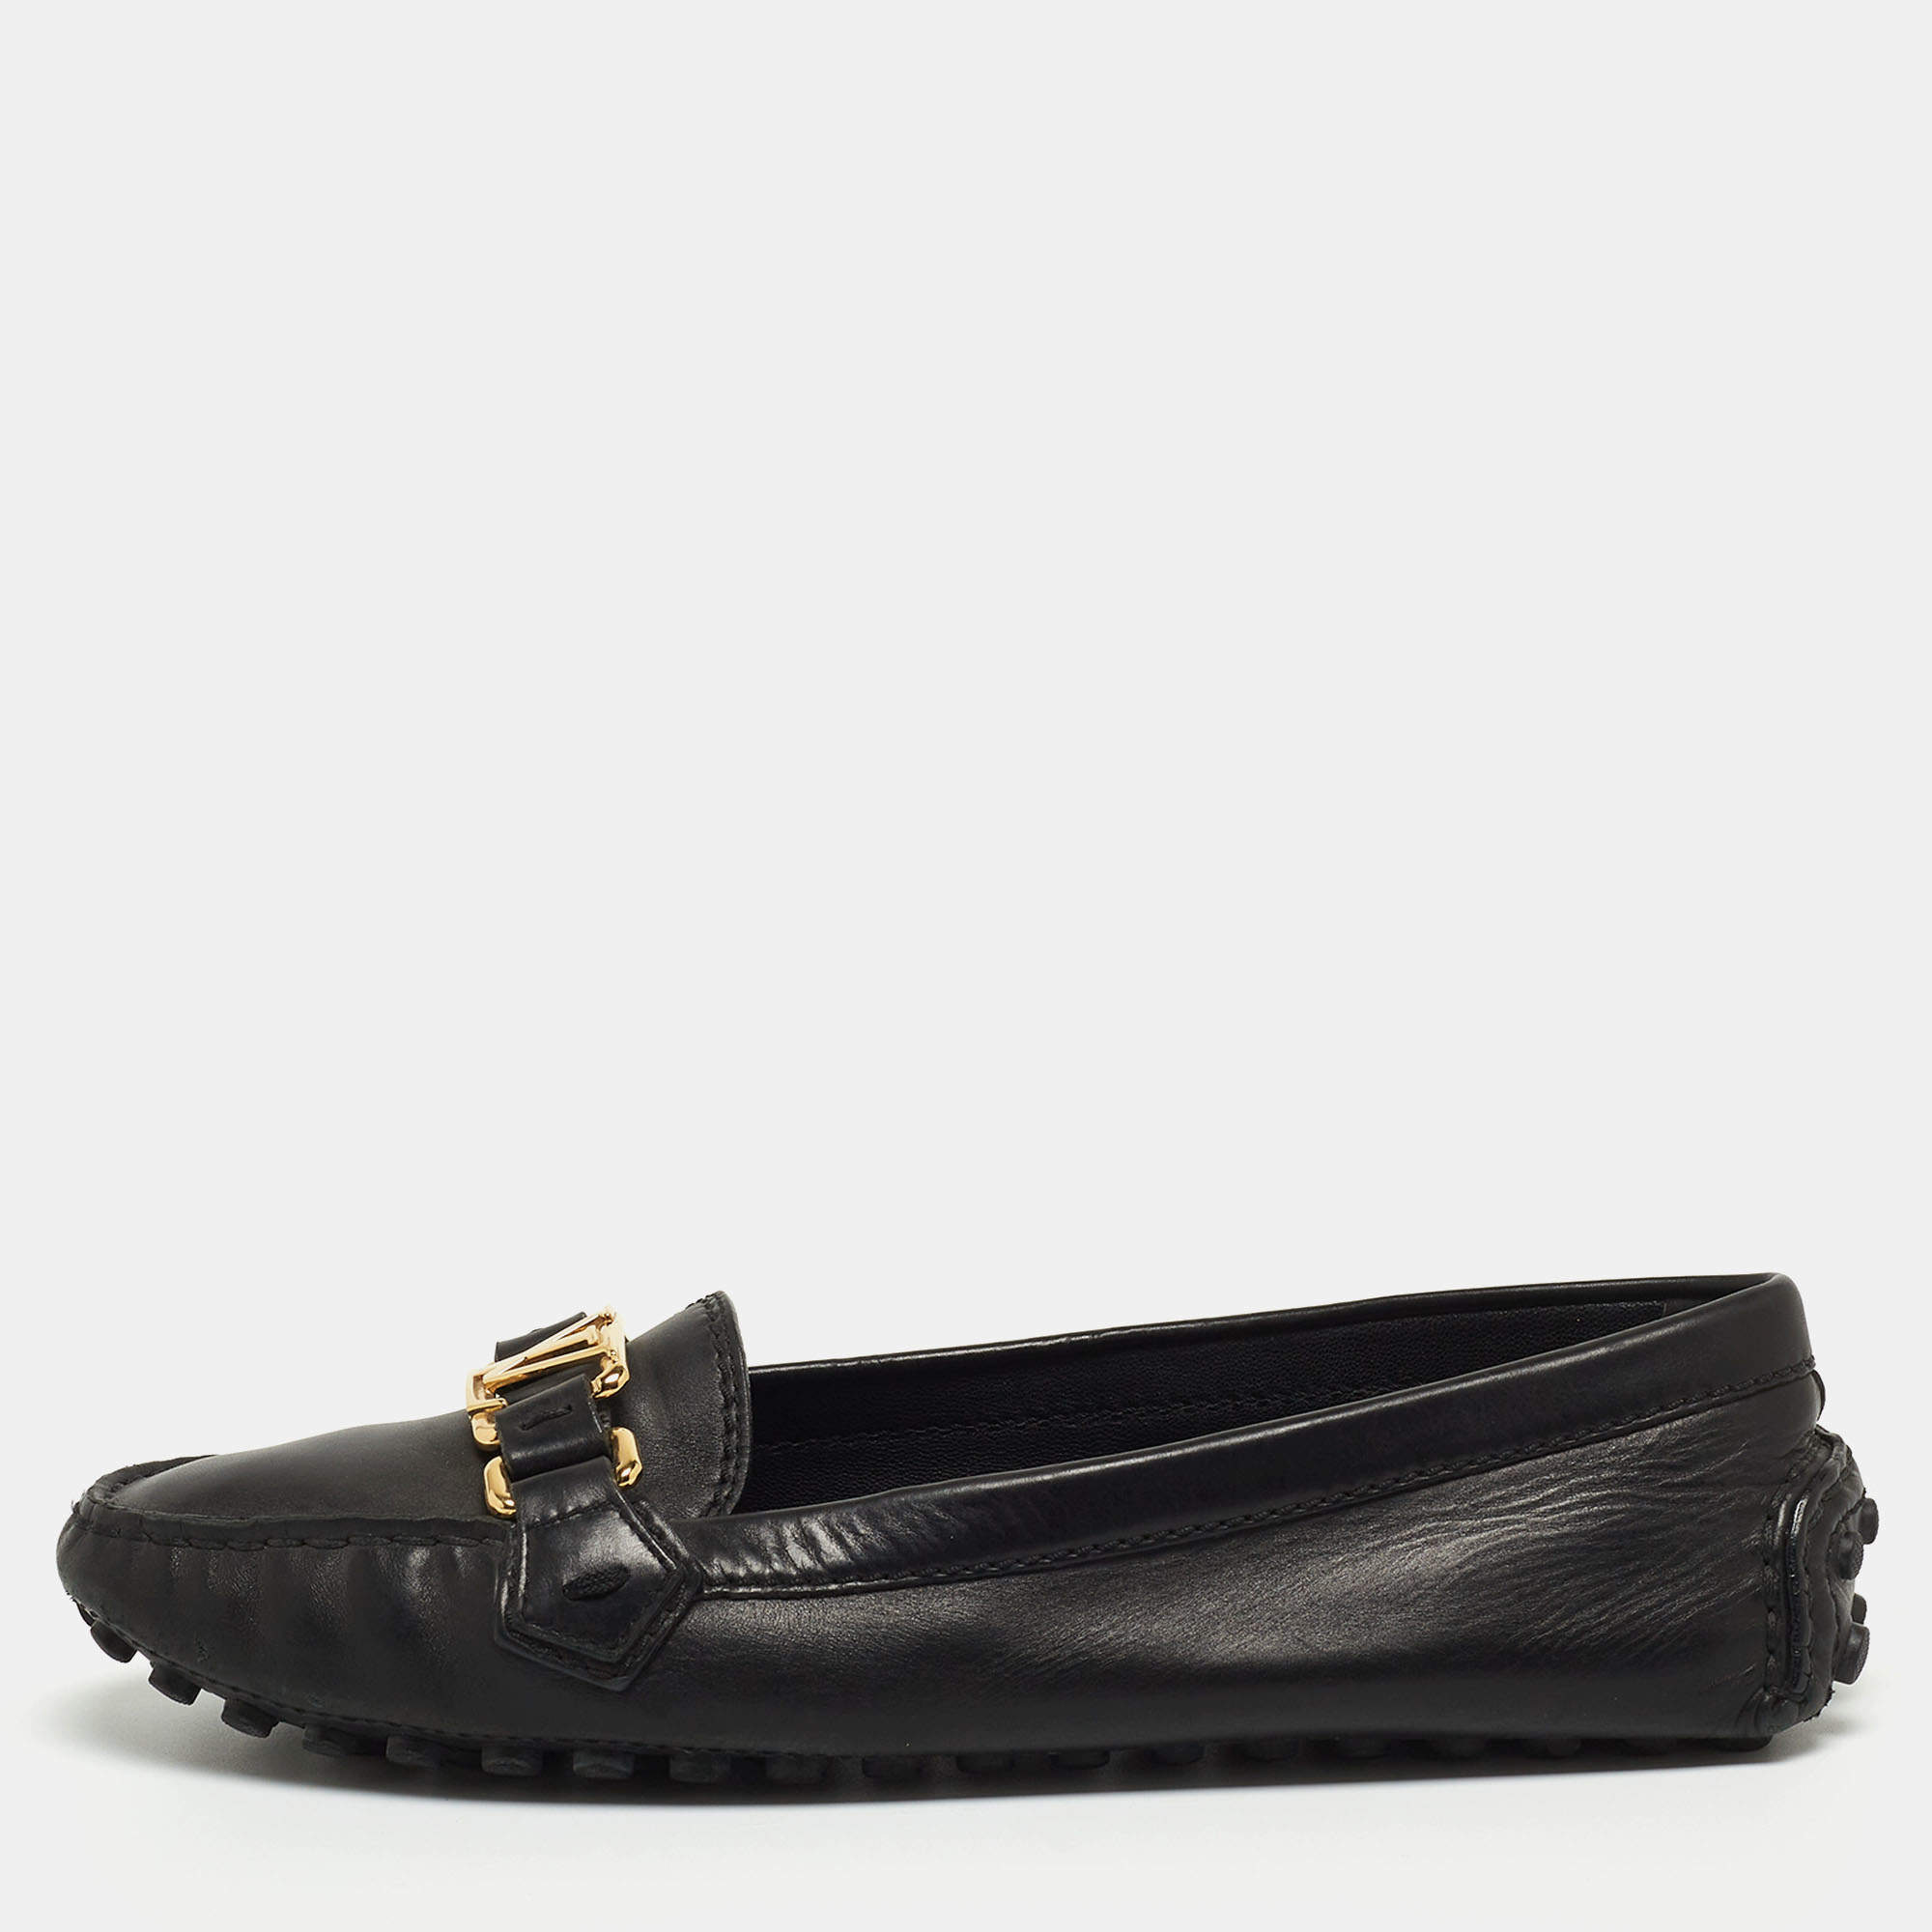 Ladies Louis Vuitton Loafers